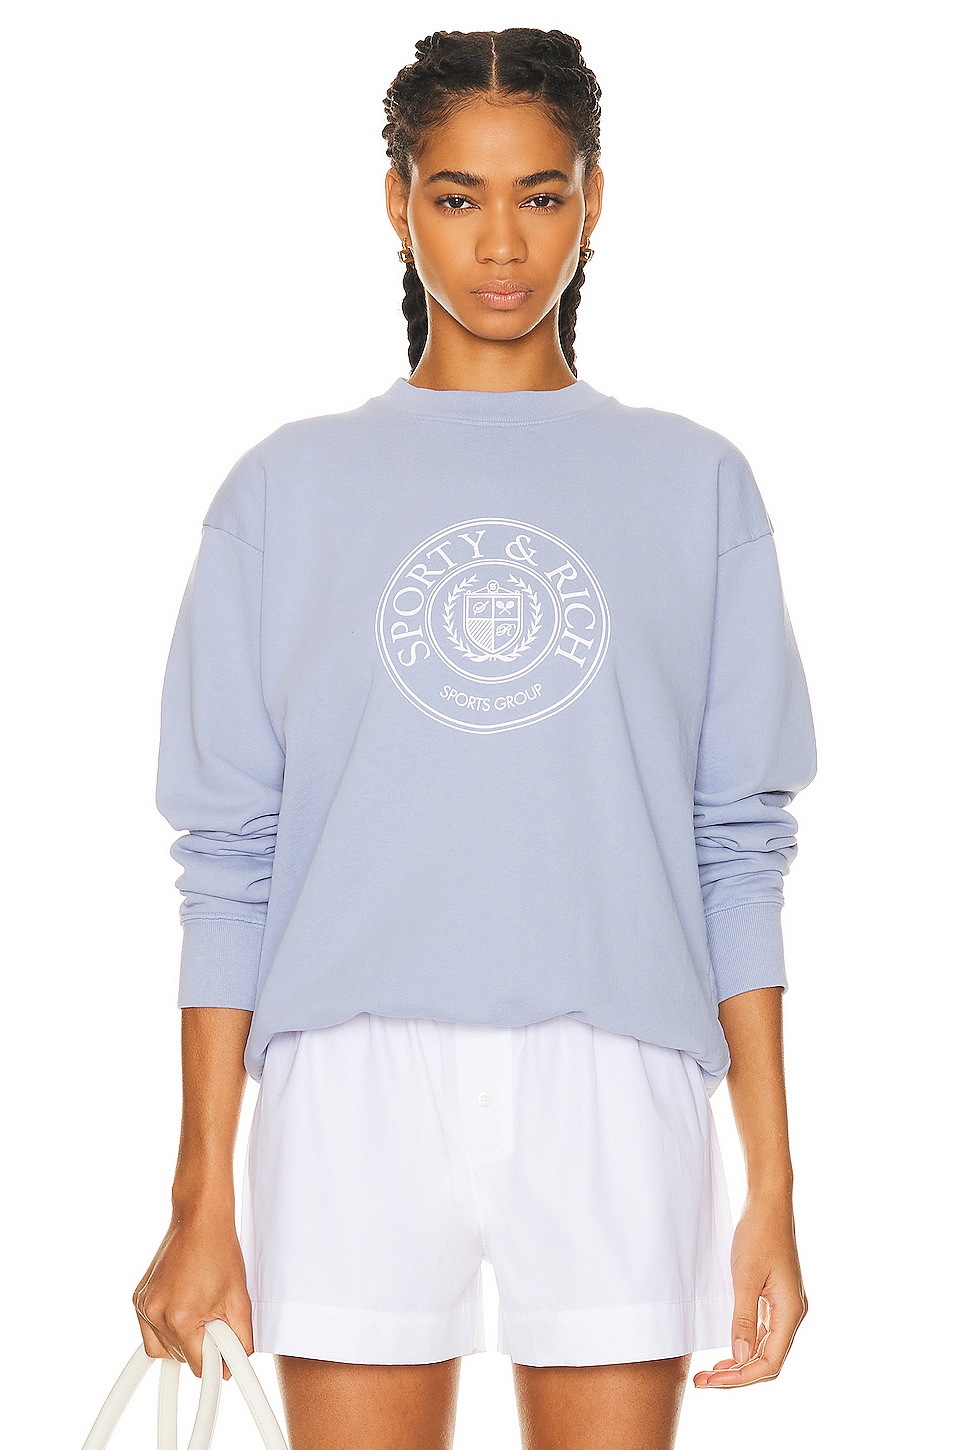 Image 1 of Sporty & Rich Connecticut Crest Crewneck Sweater in Washed Periwinkle